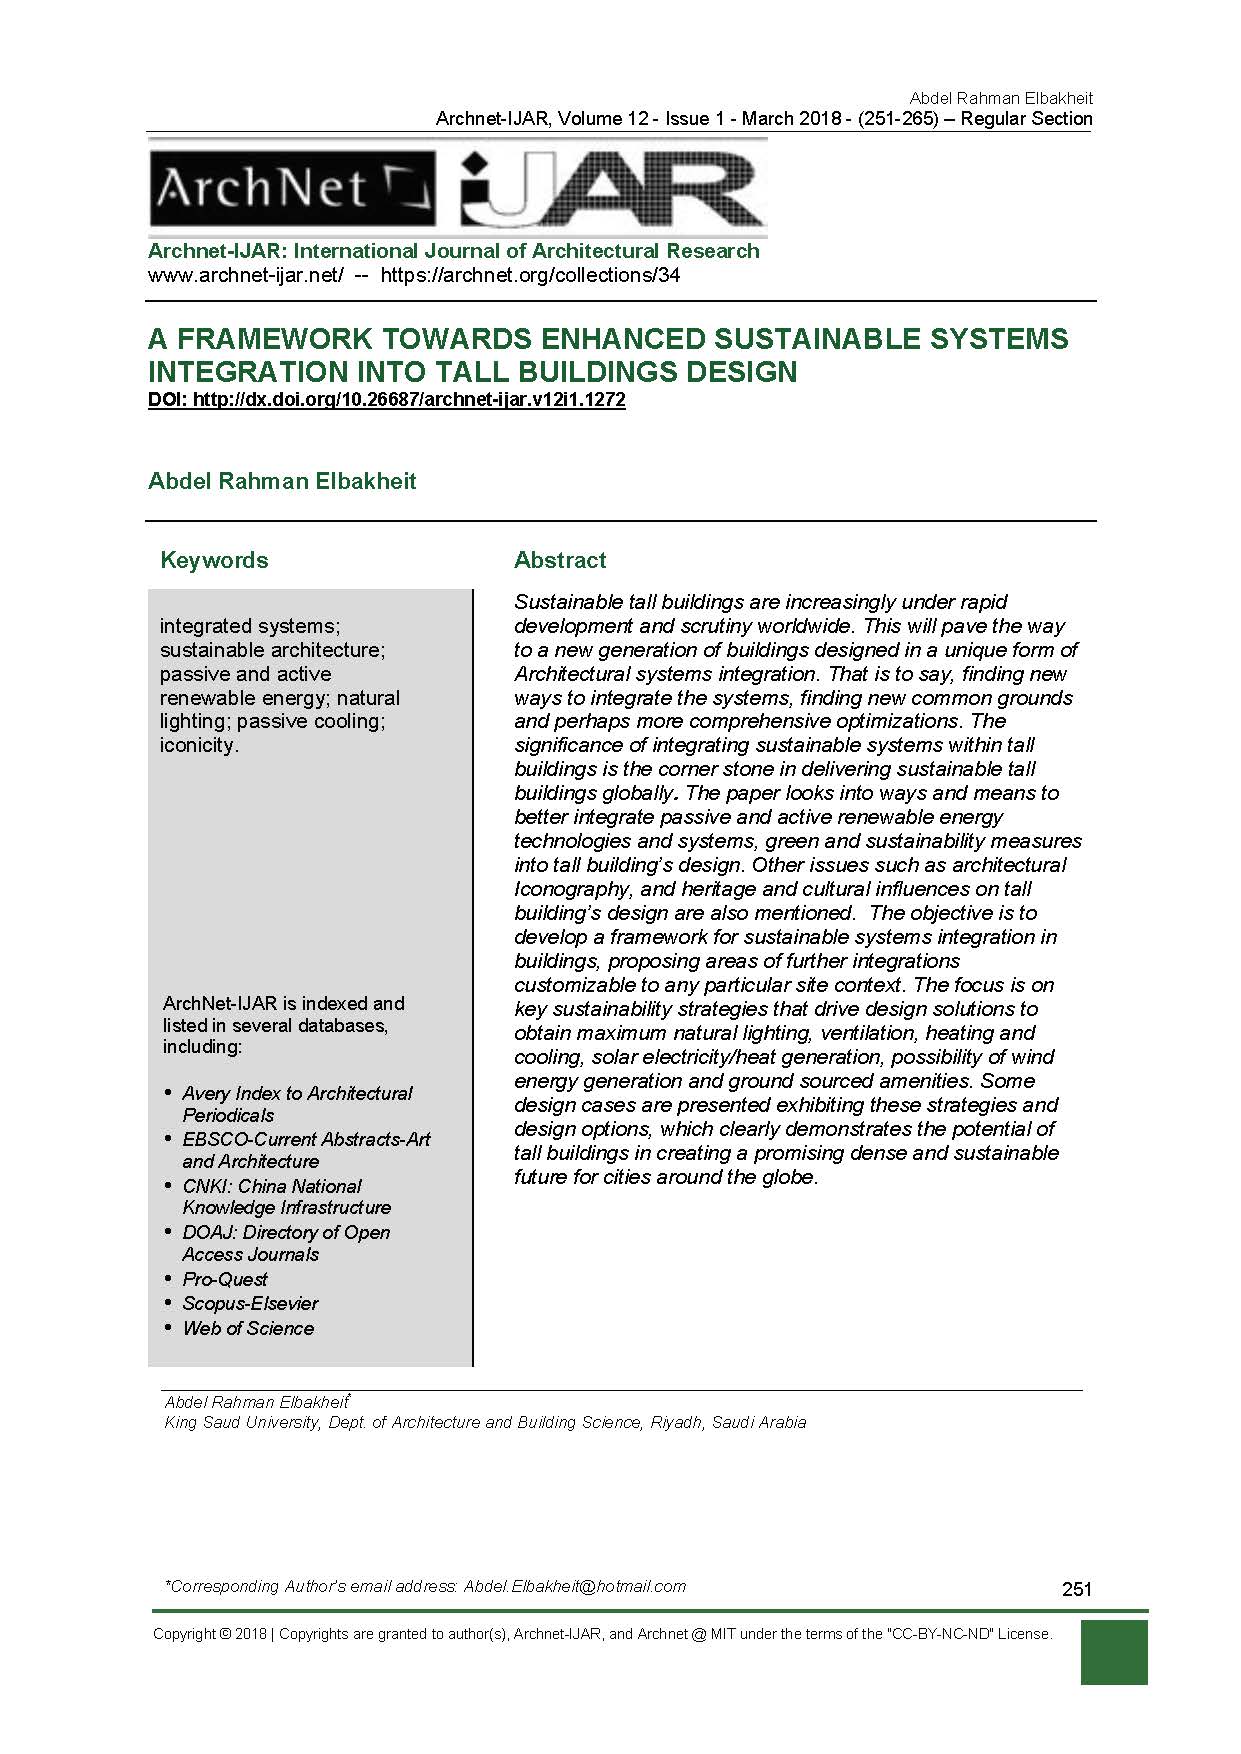 A Framework Towards Enhanced Sustainable Systems Integration into Tall Buildings Design